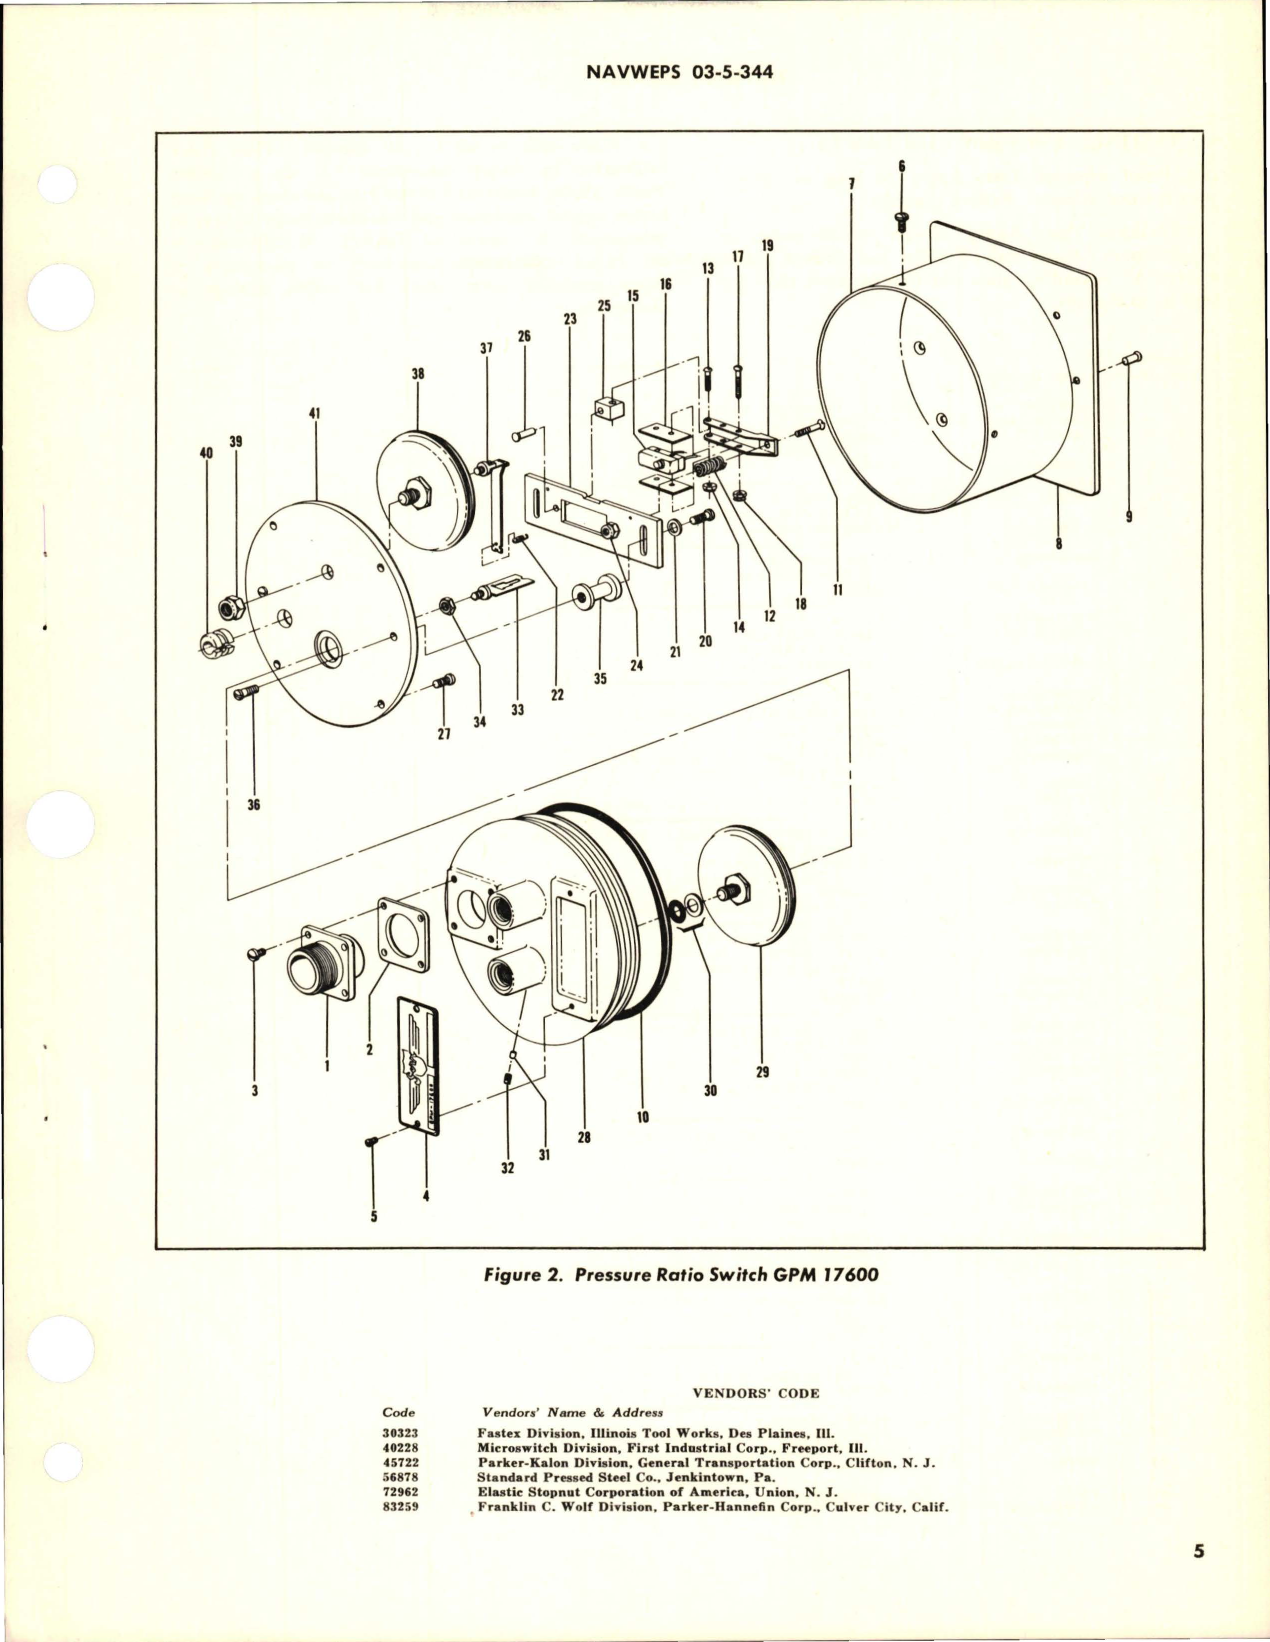 Sample page 5 from AirCorps Library document: Overhaul Instructions with Parts Breakdown for Pressure Ratio Switch - GPM 17600 